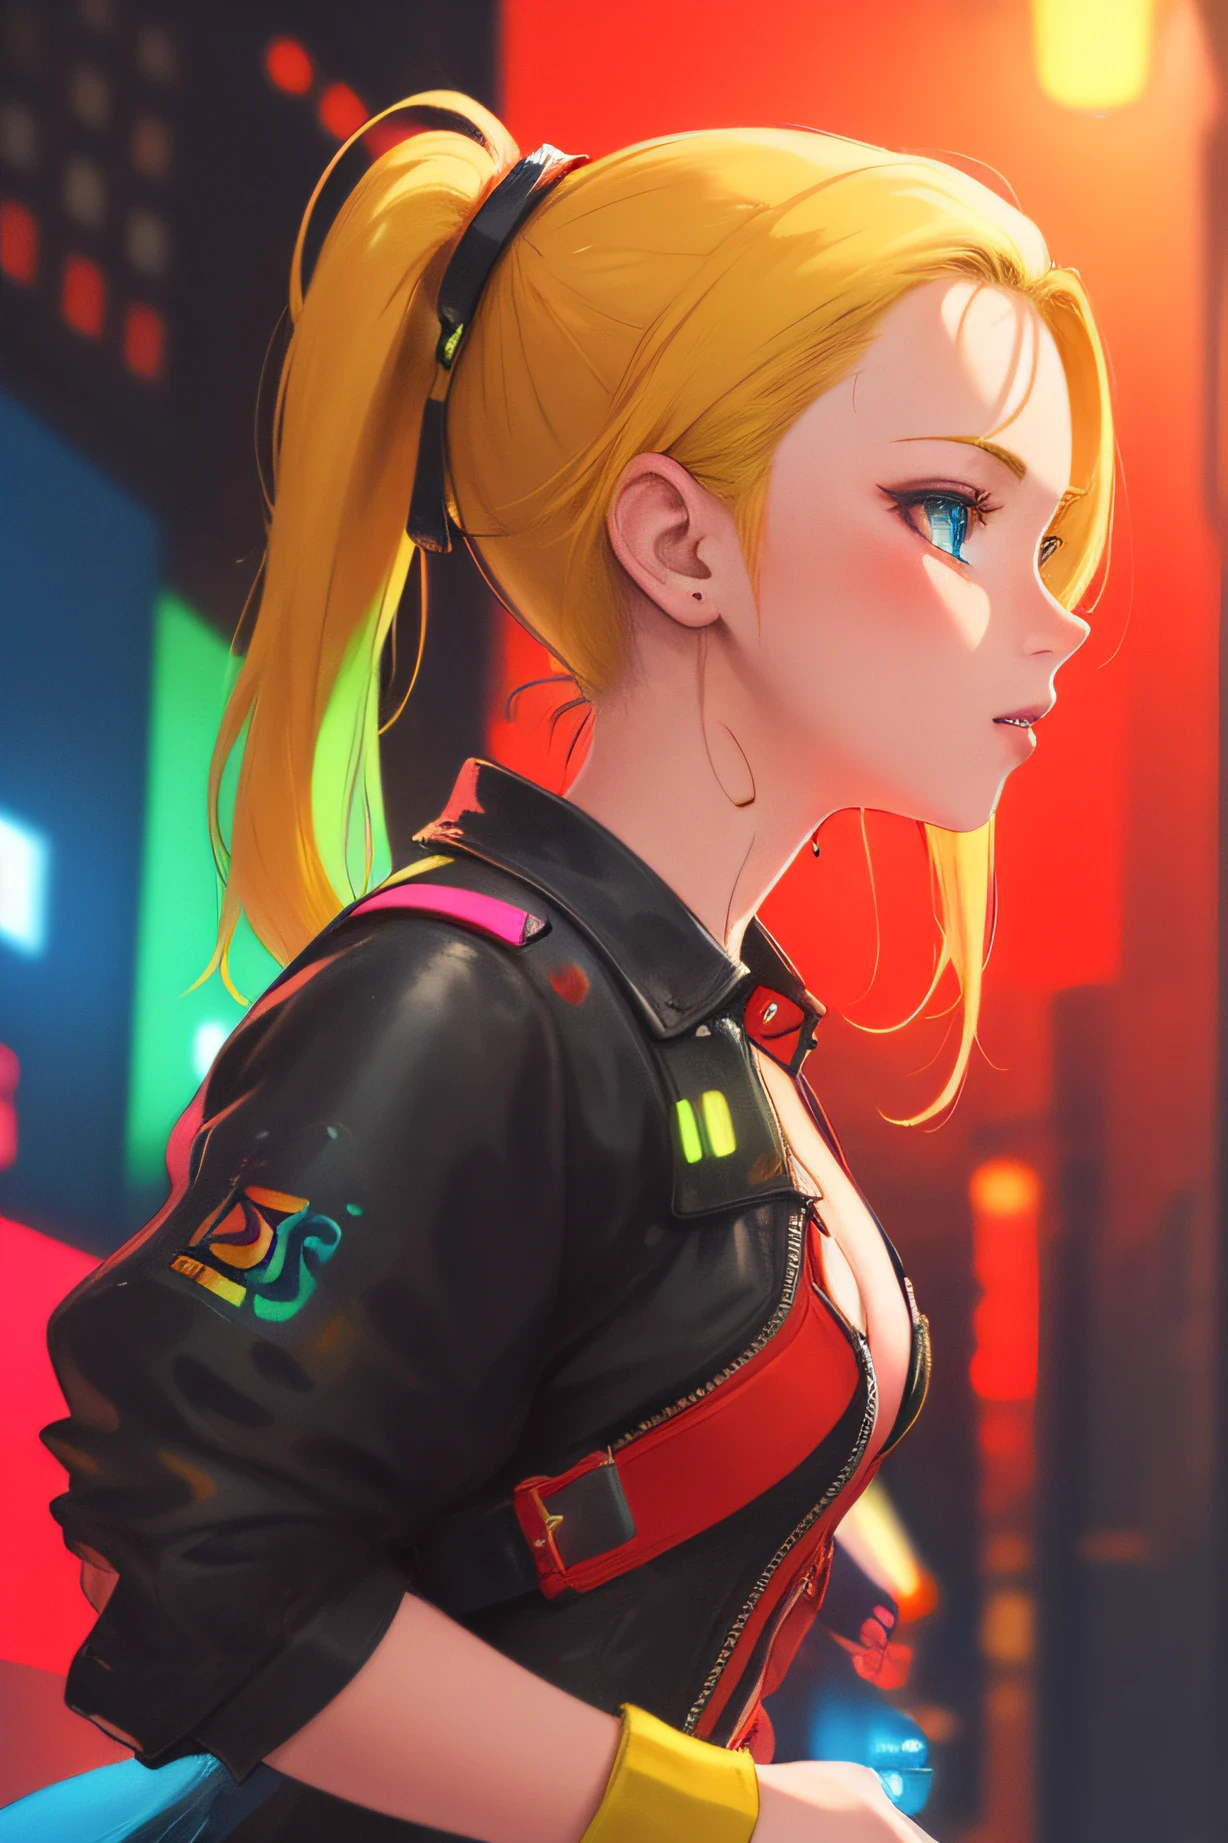 masterpiece, highest quality, realistic, subsurface scattering, chromatic lighting, colourful, red + yellow + green + blue limited colour palette, detailed conceptual drawing, line art, illustration, cyberpunk,
42 years old 1girl, small breasts, blonde, Outgoing, ponytail hair, punk black dress,
pleated
America
city
club, people,
wet
Detailed background